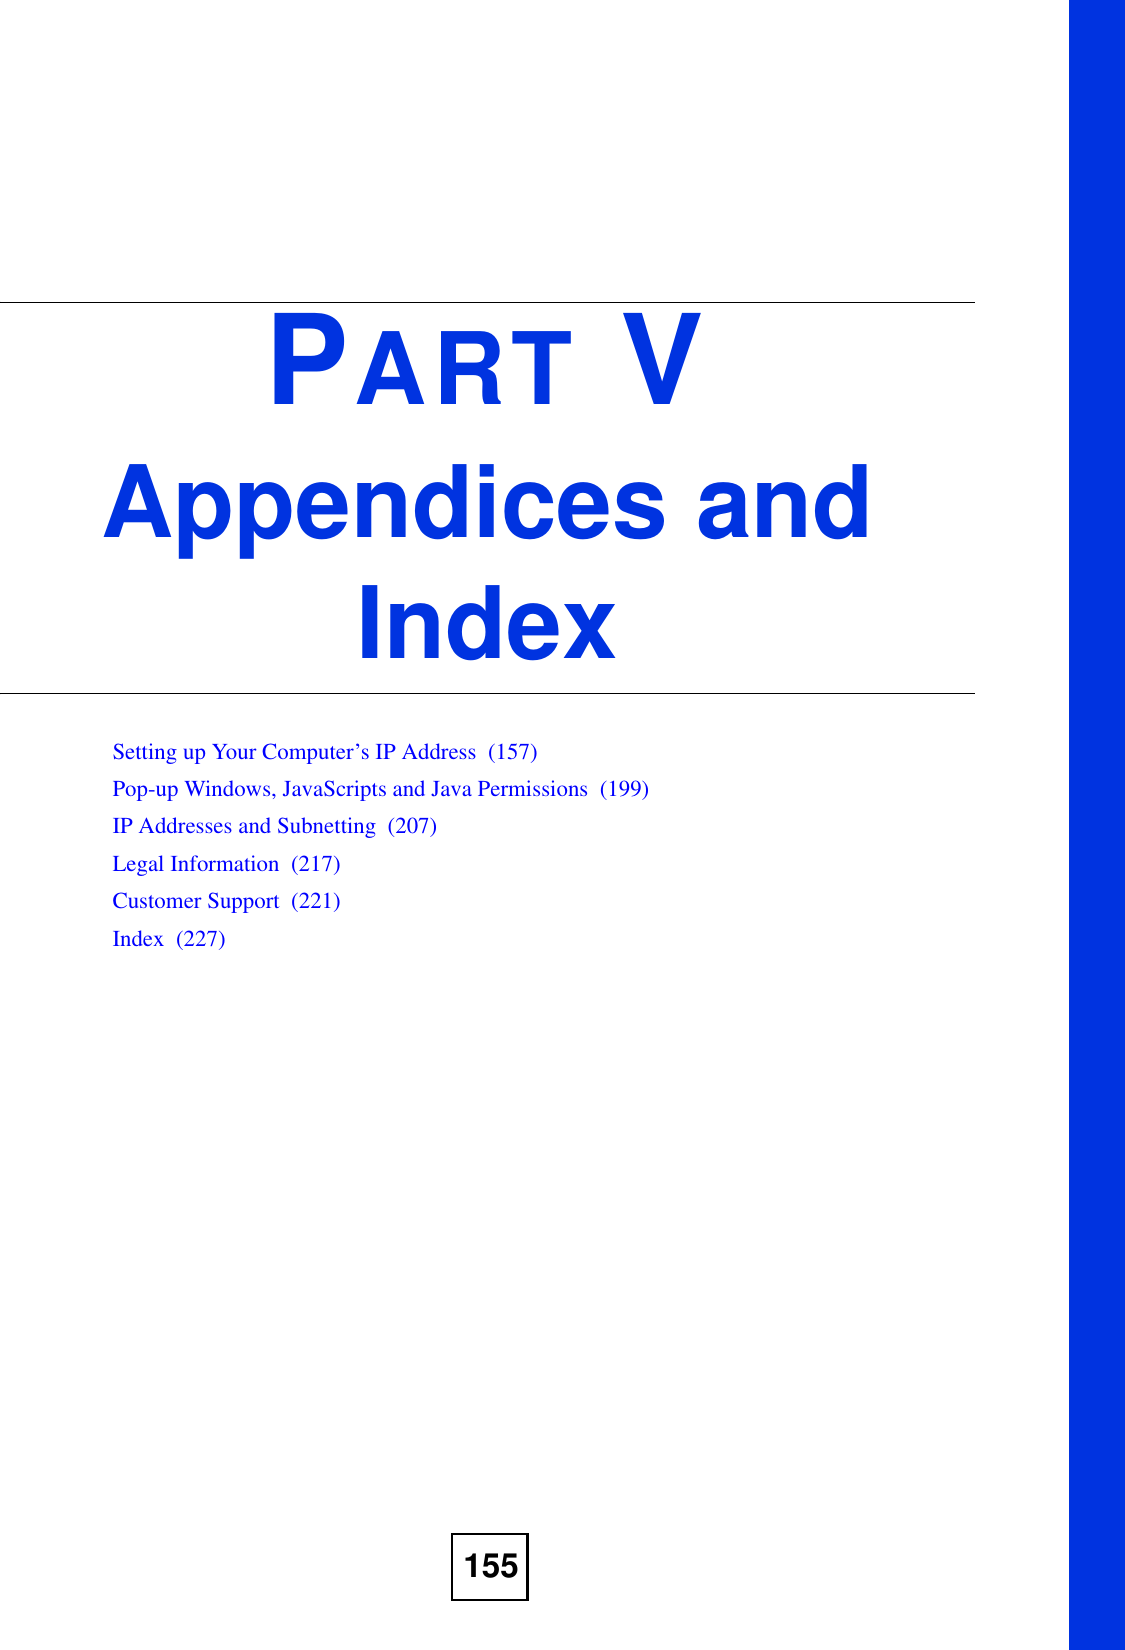 155PART VAppendices and IndexSetting up Your Computer’s IP Address  (157)Pop-up Windows, JavaScripts and Java Permissions  (199)IP Addresses and Subnetting  (207)Legal Information  (217)Customer Support  (221)Index  (227)